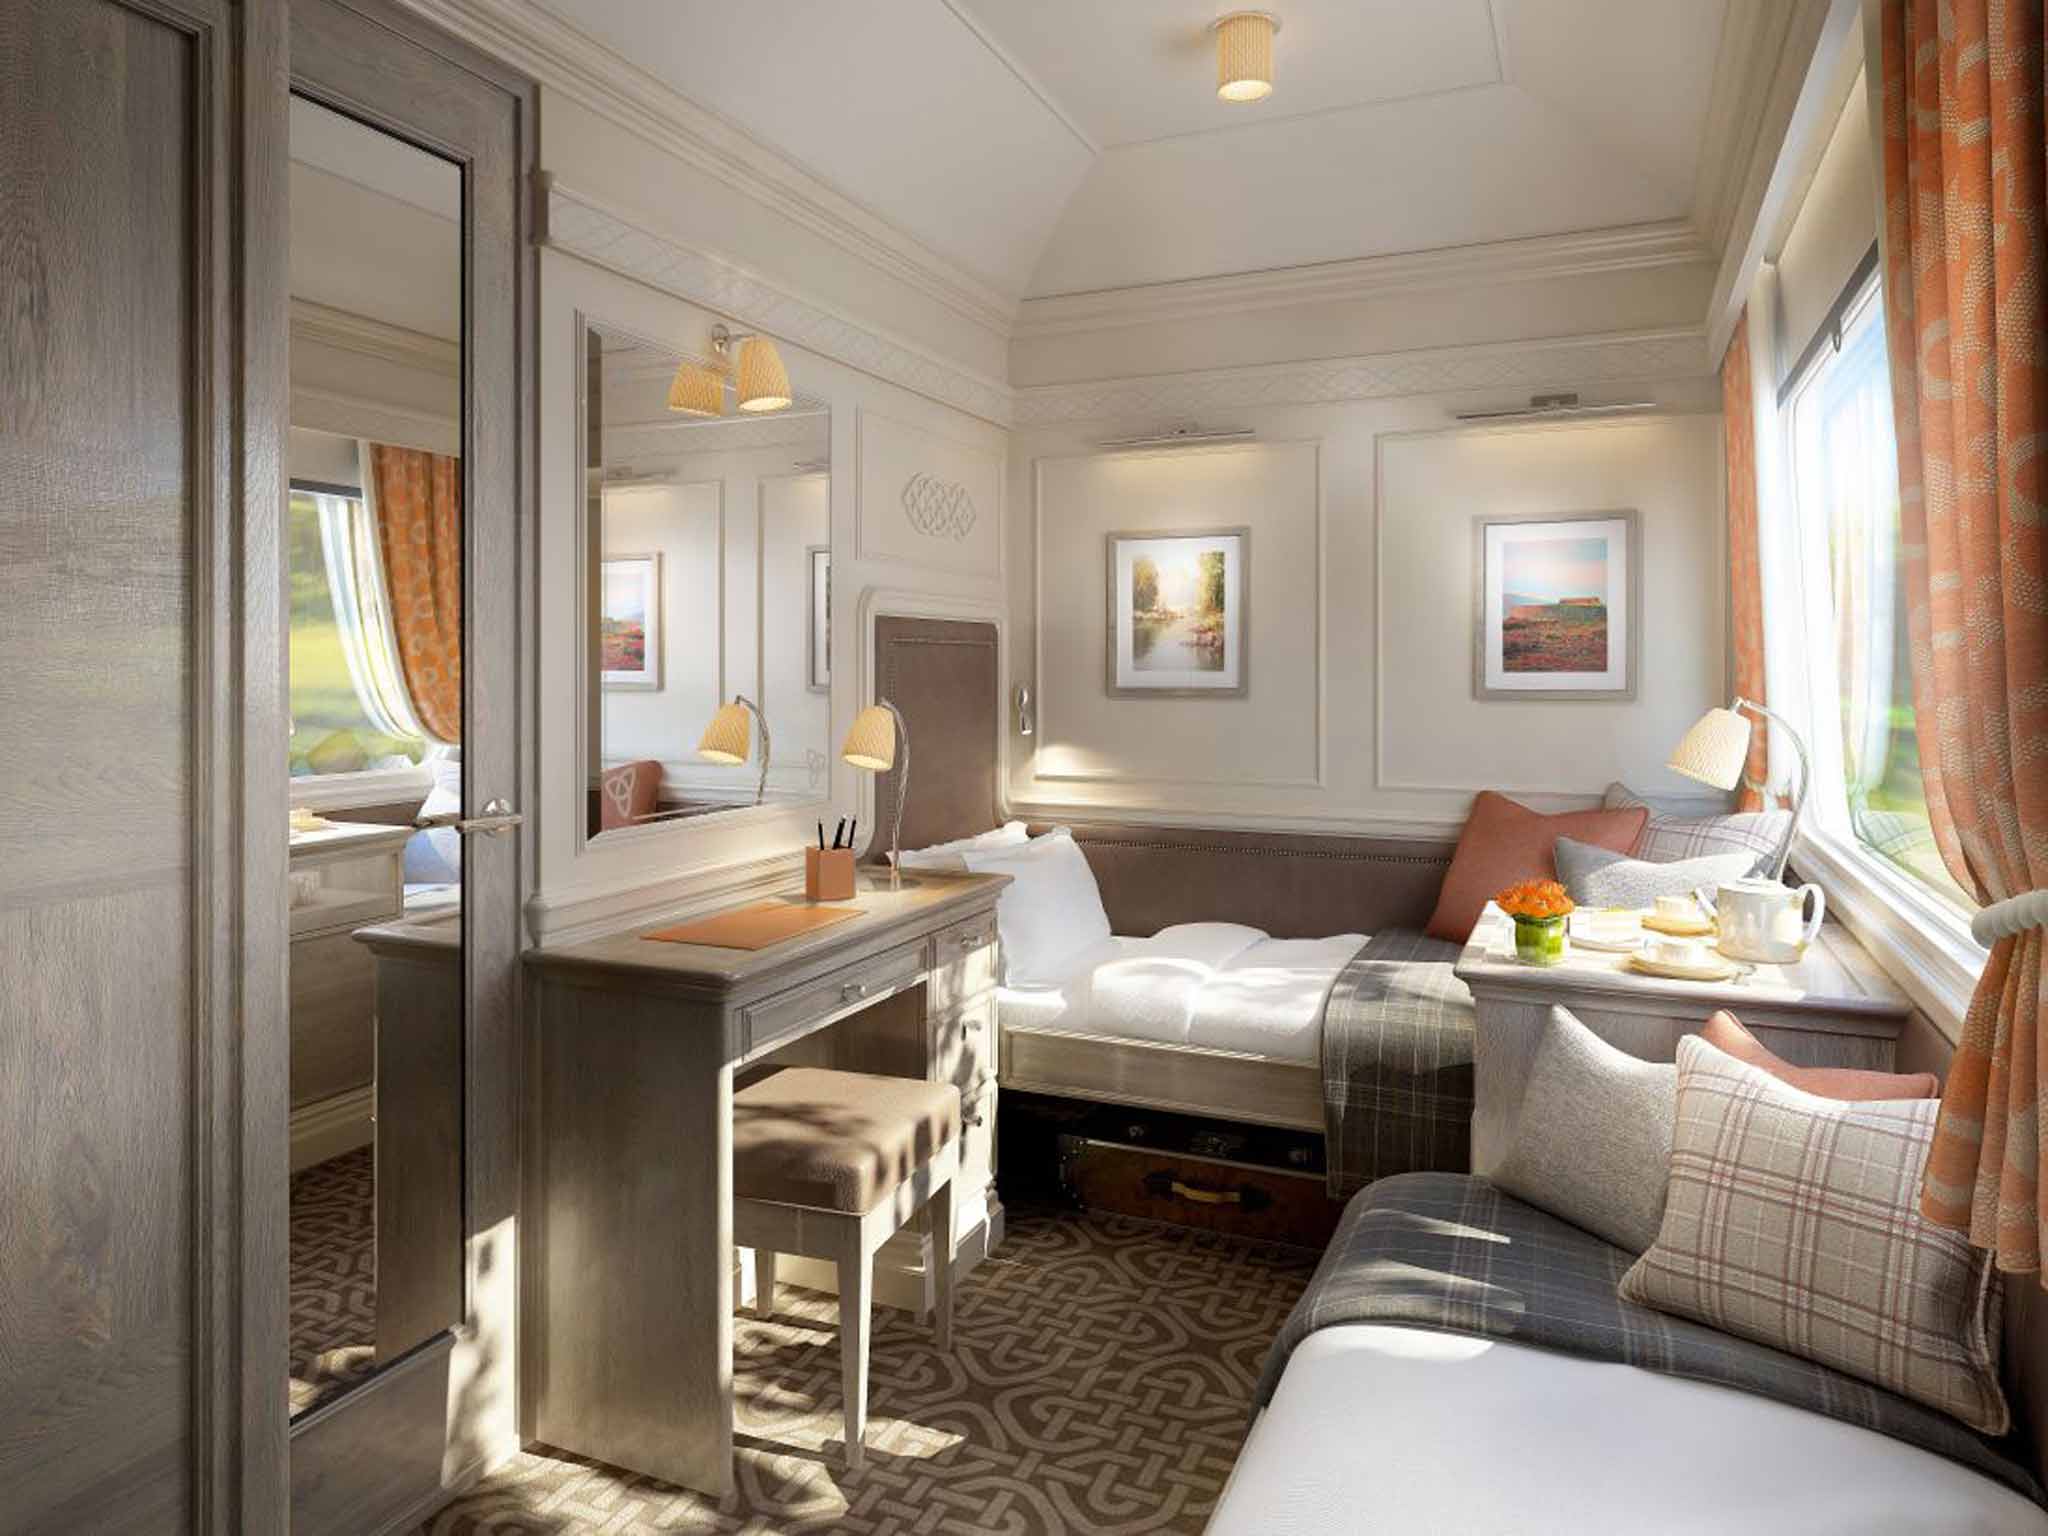 The Belmond Grand Hibernian will be Ireland's first rail-cruise experience, starting in 2016